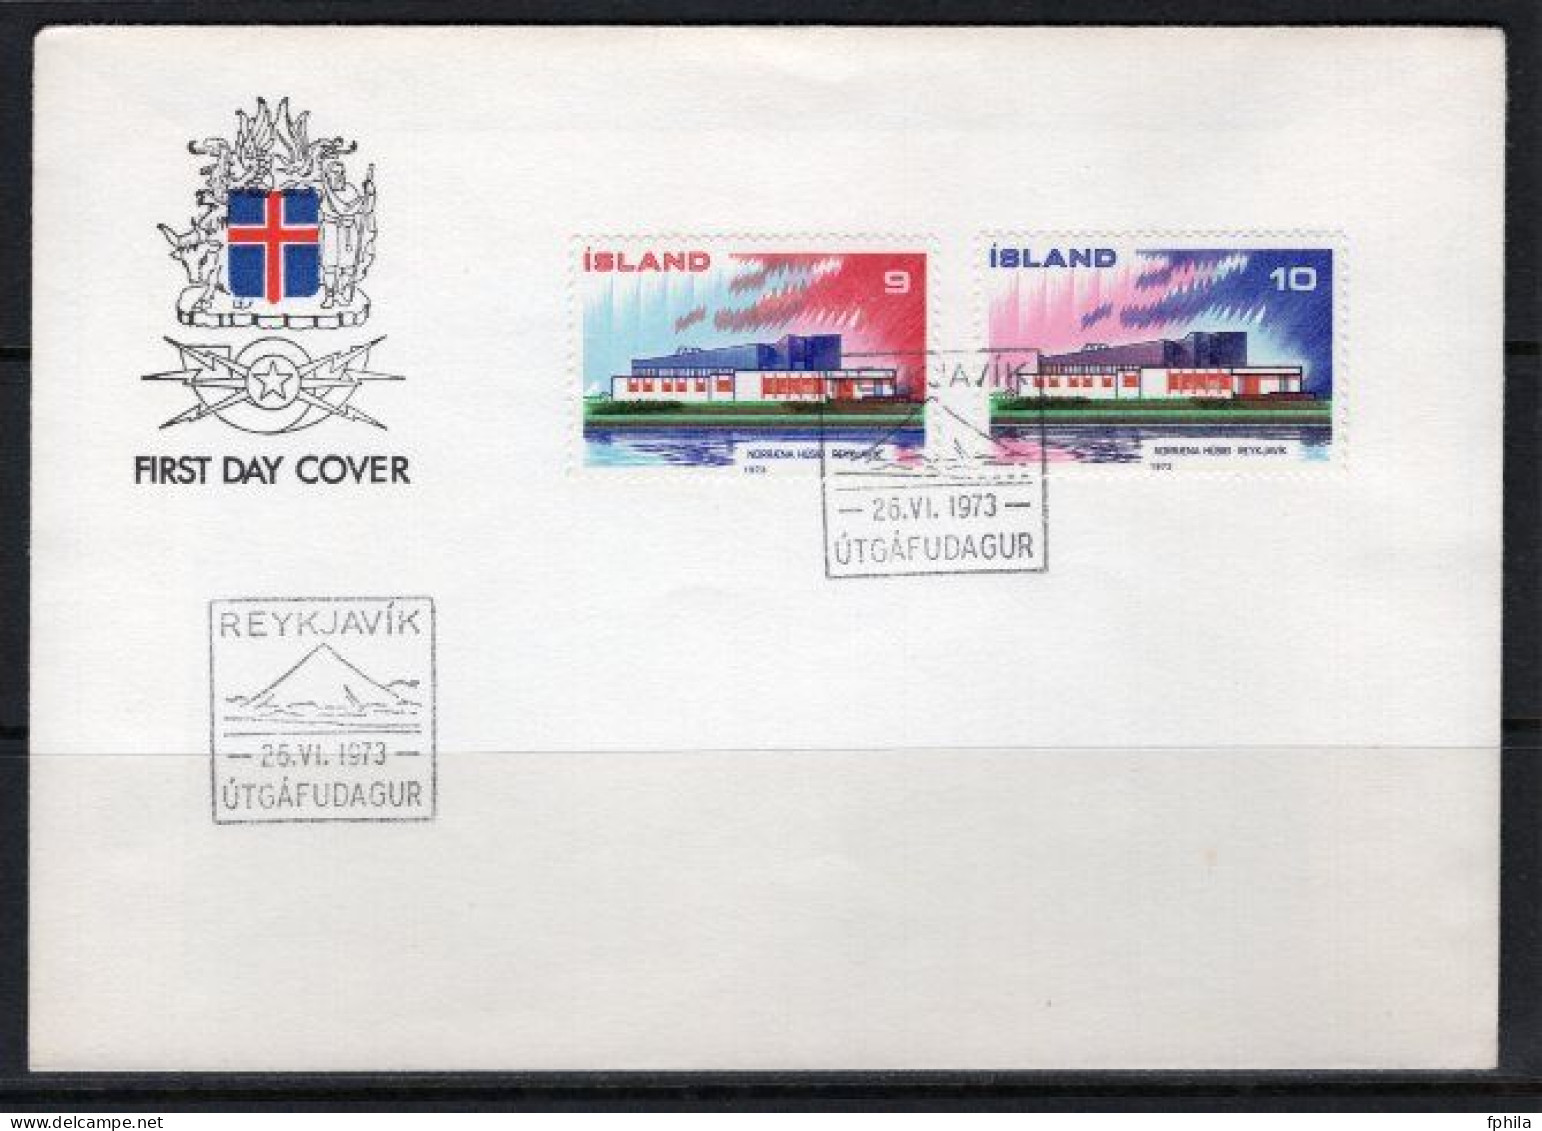 1973 ICELAND NORDIC ISSUE FDC - FDC